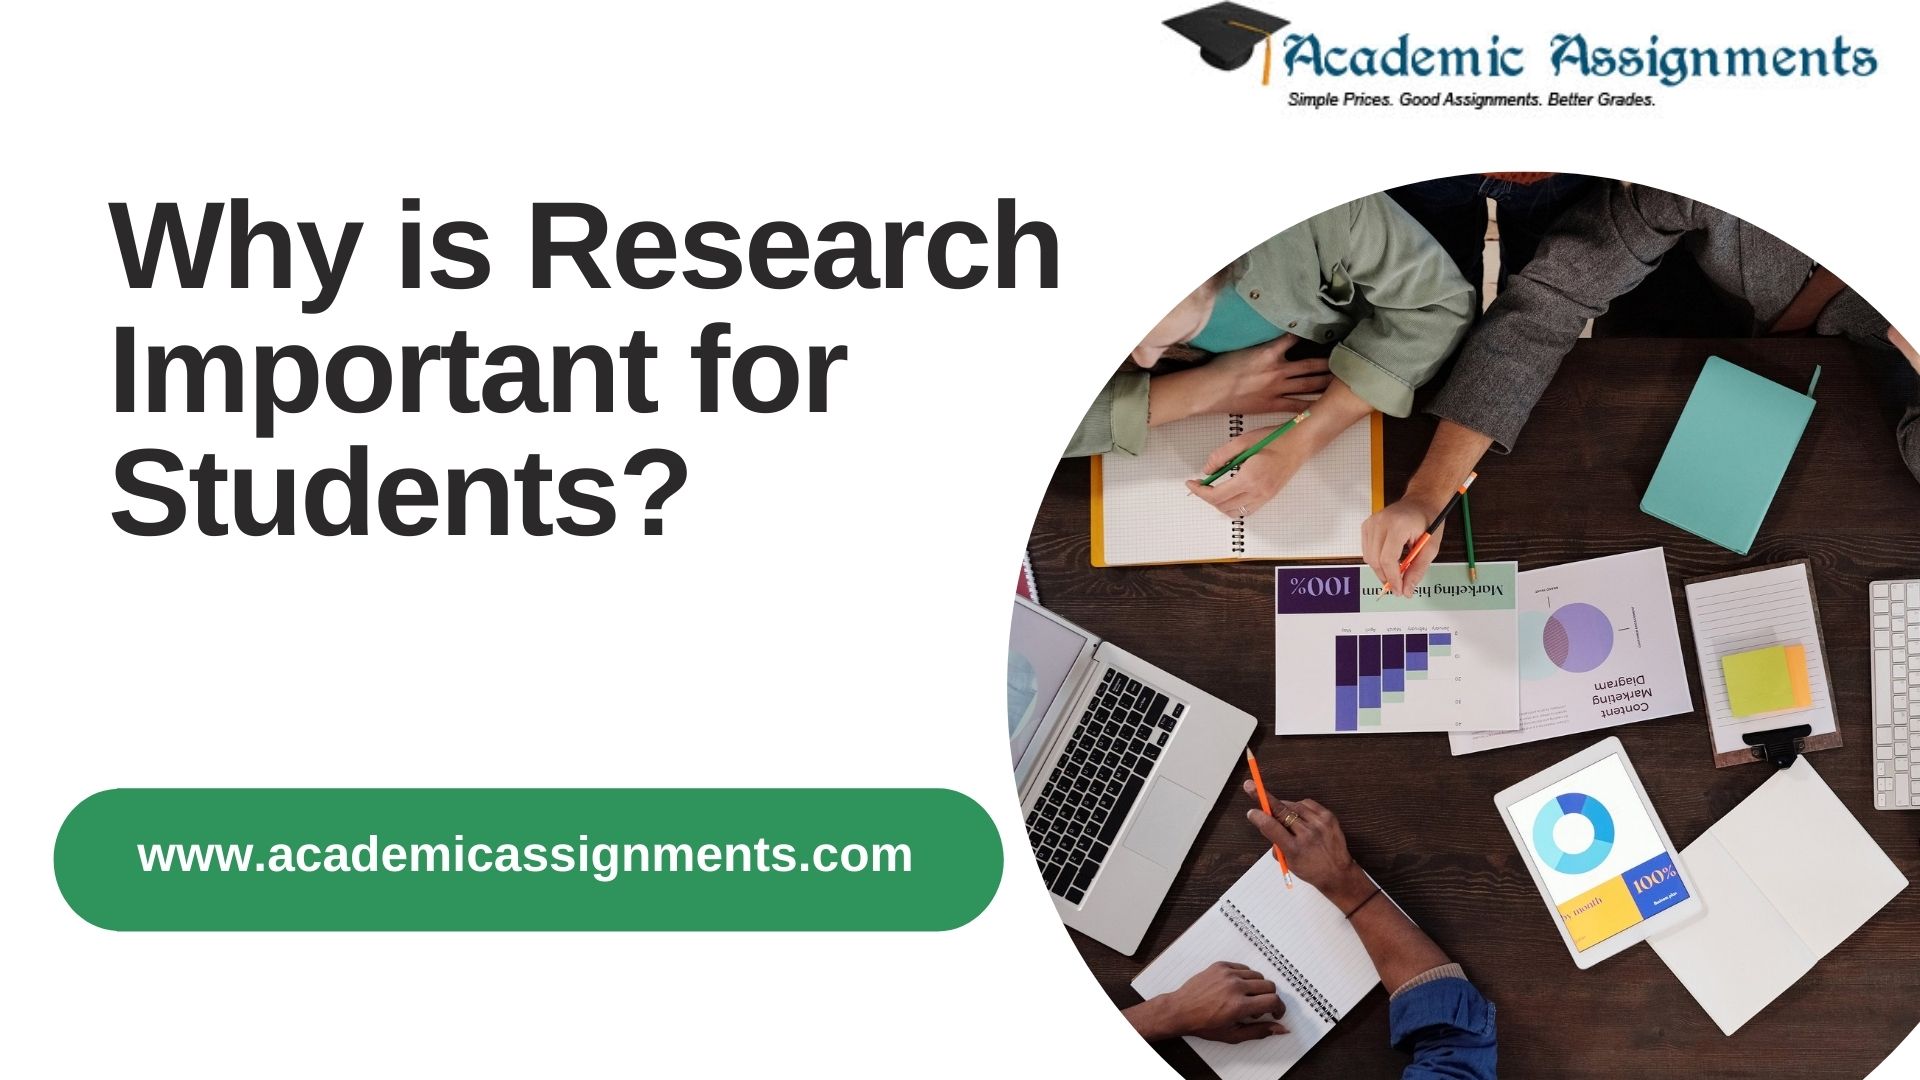 Why is Research Important for Students